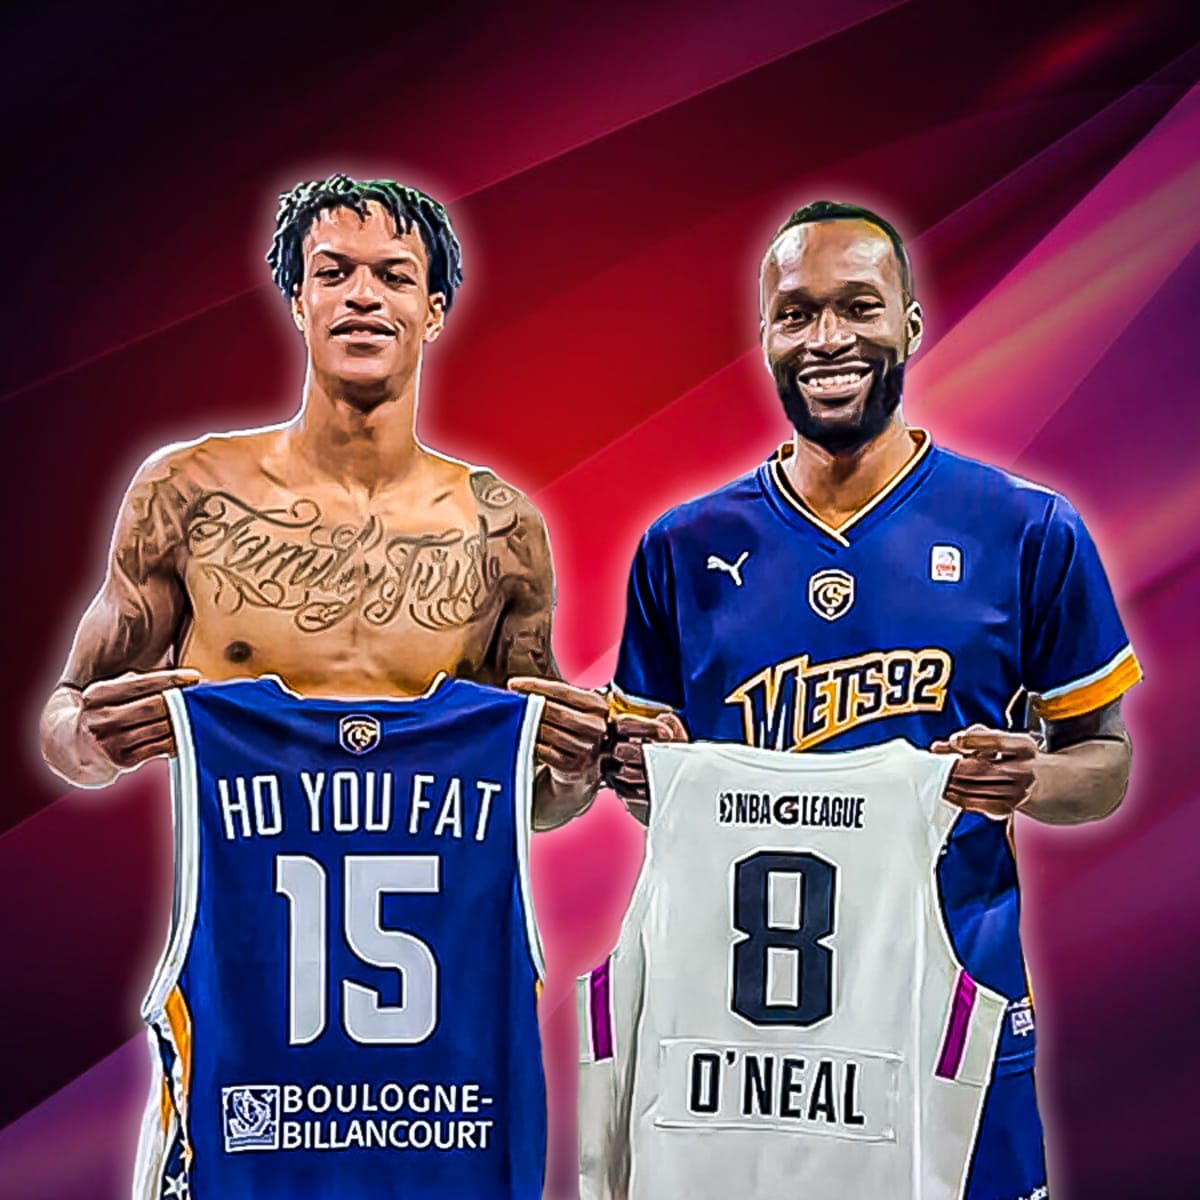 NBA Fans Can't Believe Shareef O'Neal Did A Jersey Swap With Steeve Ho You  Fat After Preseason Game: I Need That Jersey - Fadeaway World